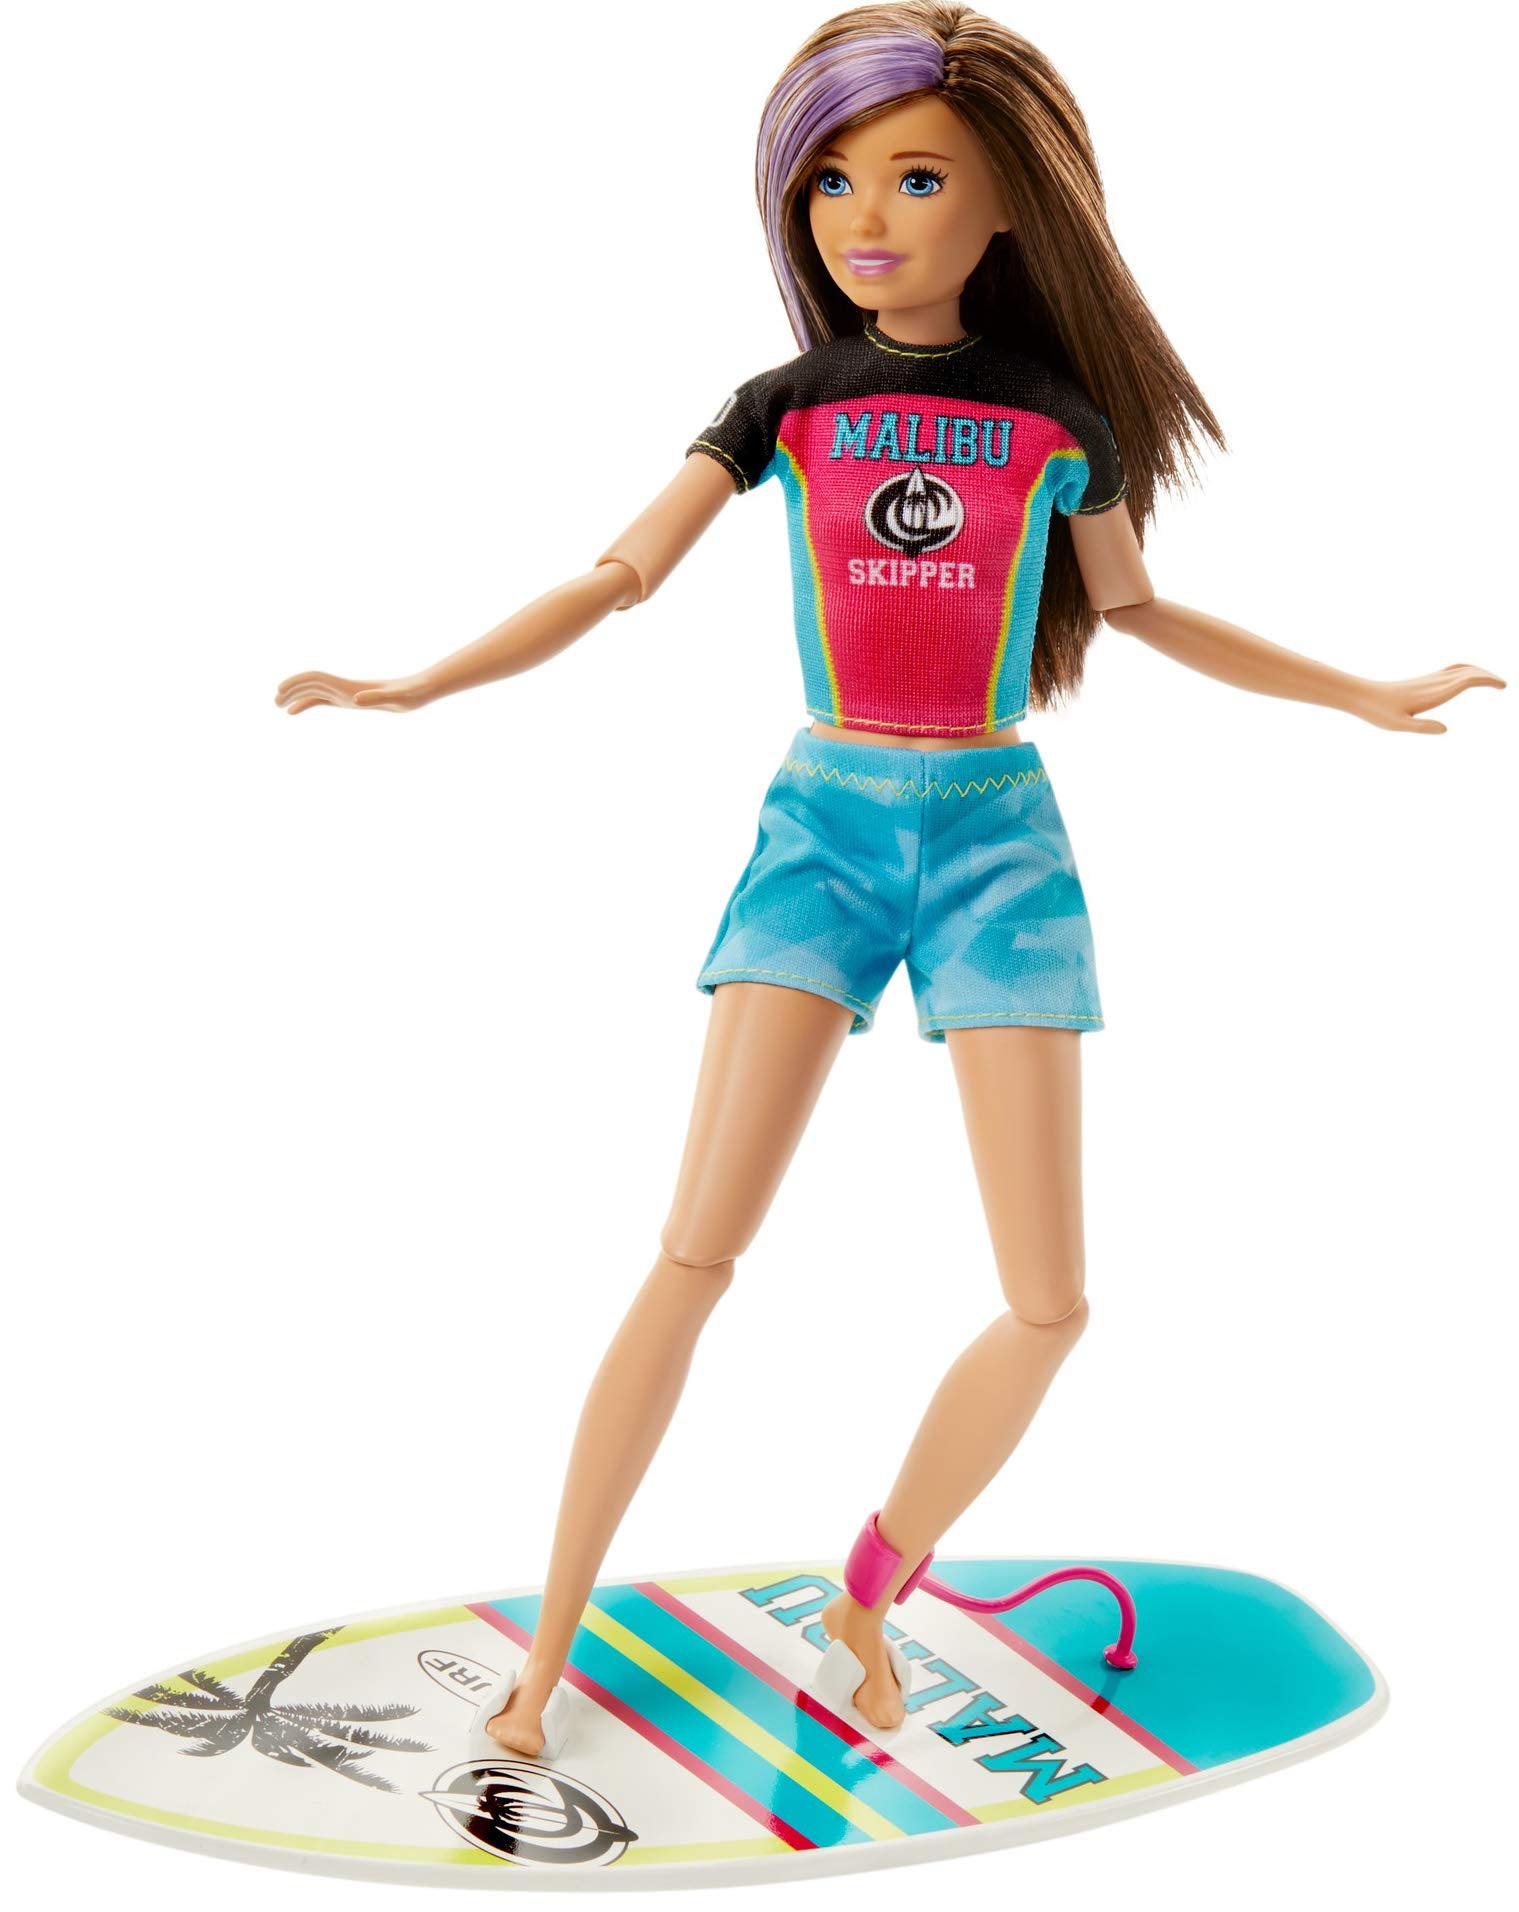 Barbie Dreamhouse Adventures Skipper Surf Doll, approx. 11-inch in Surfing Fashion, with Accessories